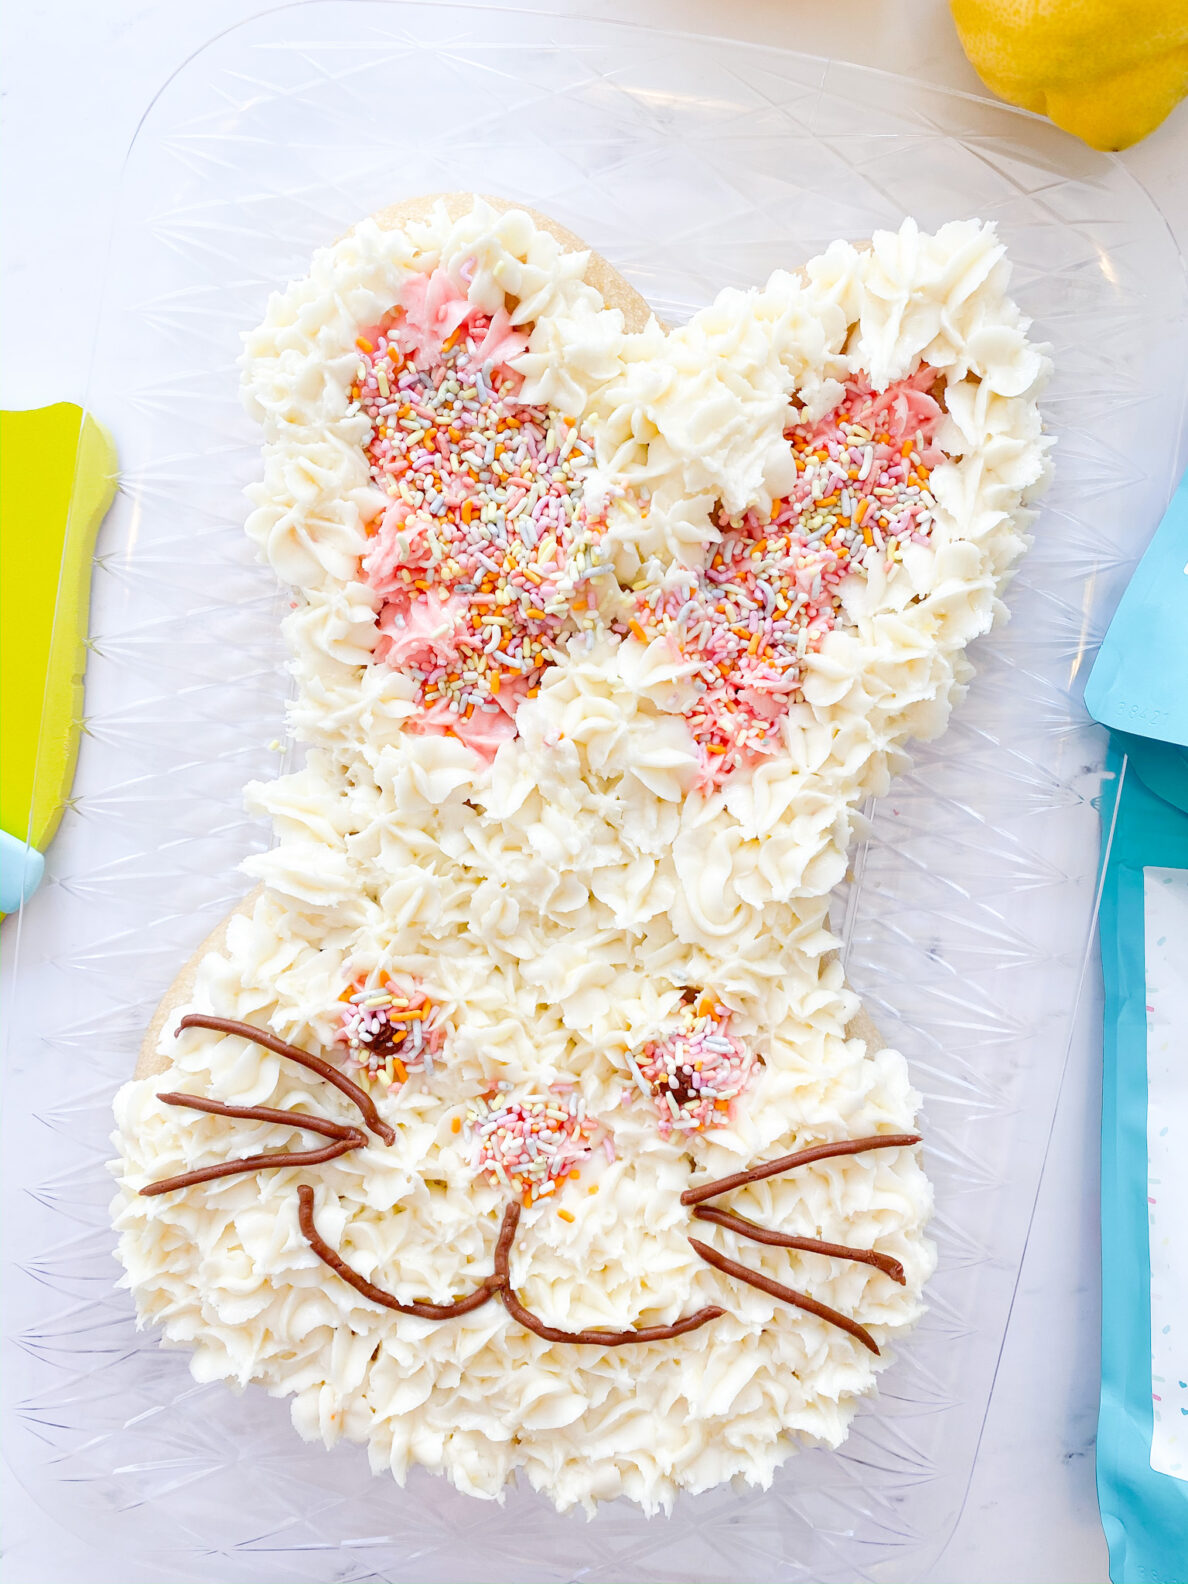 Kate's Safe & Sweet - Easter bunny cake